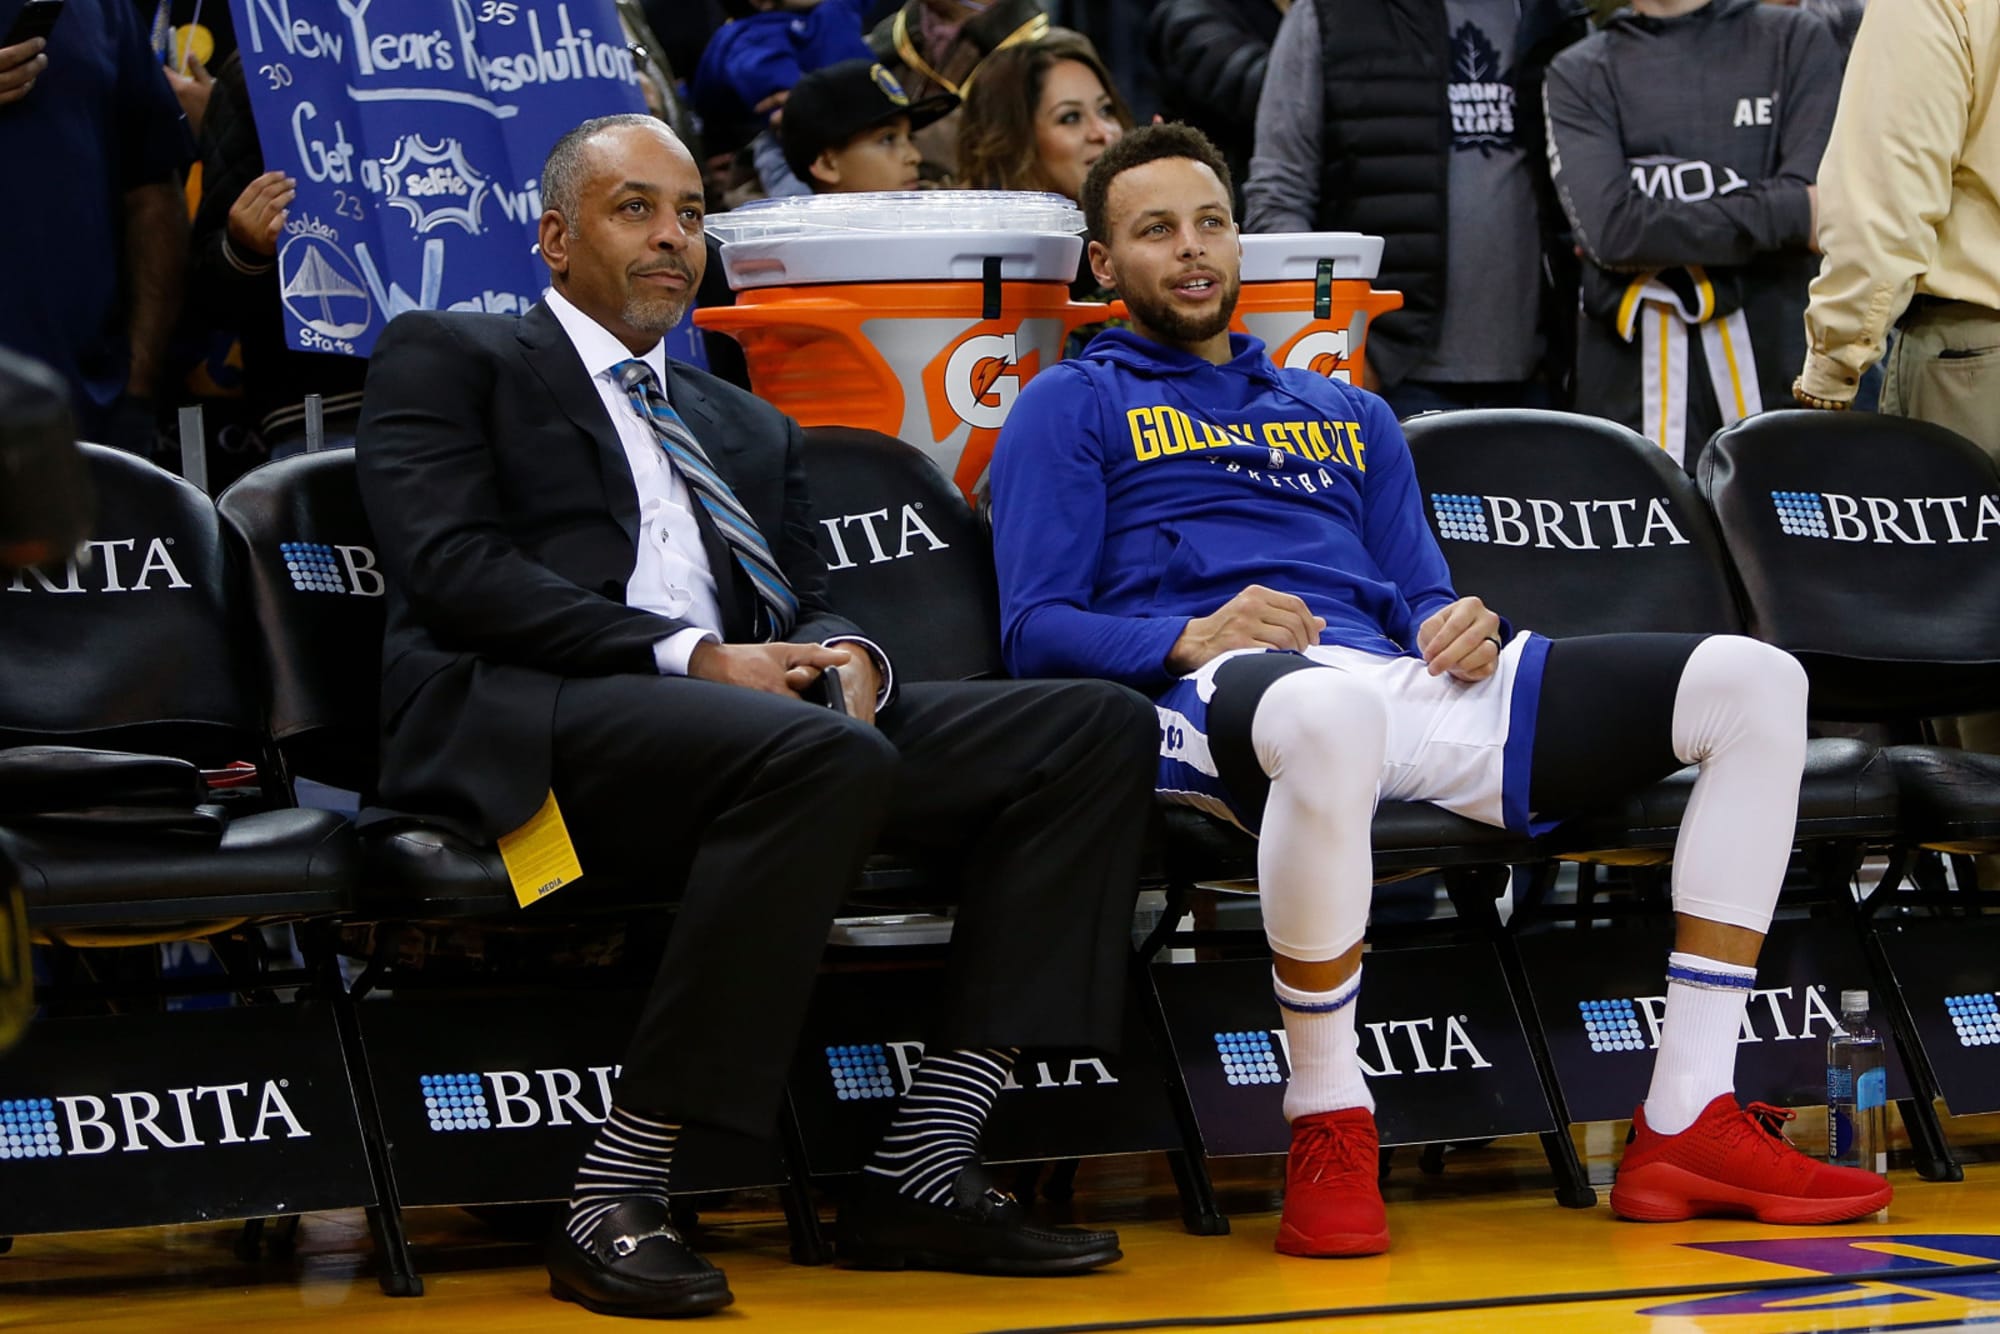 Patriots: Steph Curry's dad accuses wife of cheating with former Patriots TE